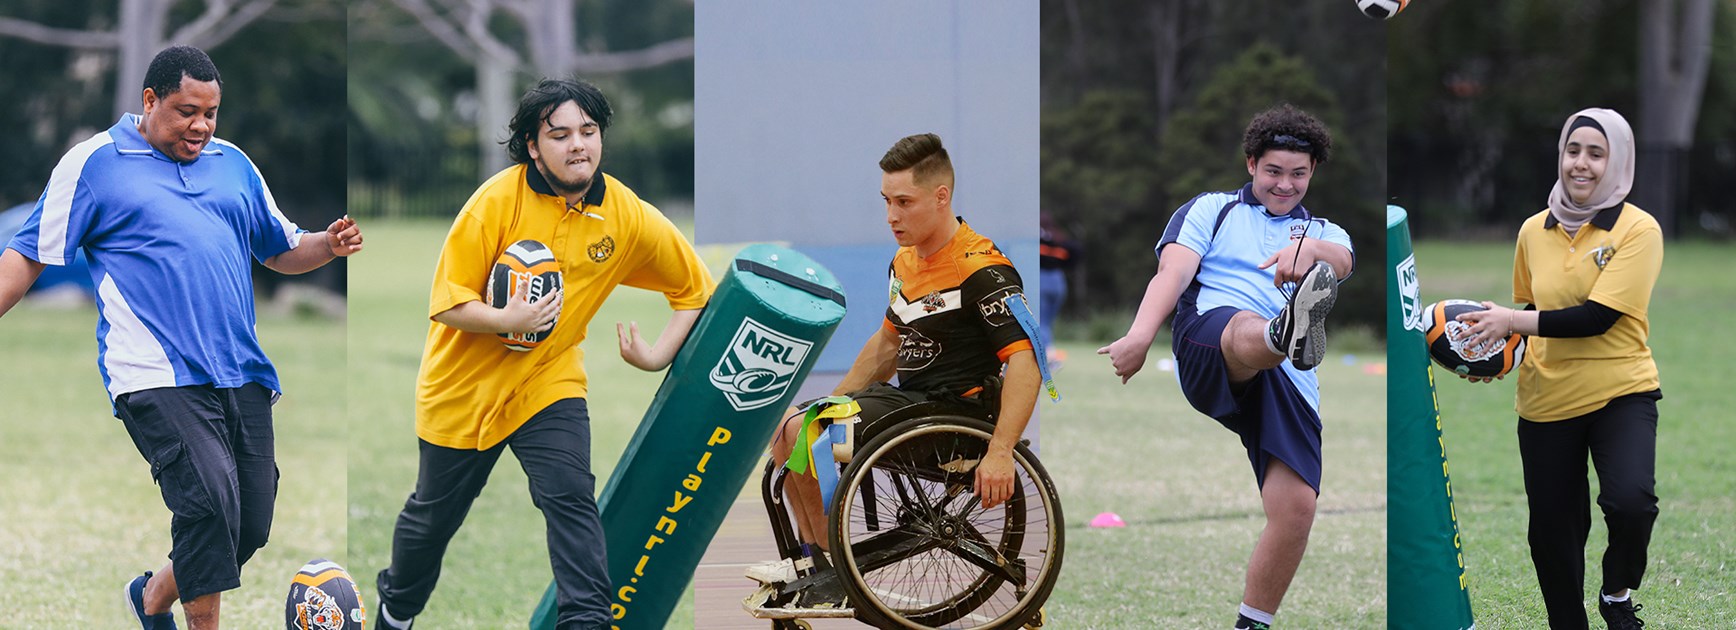 Wests Tigers continue WestConnex Varying Abilities Program